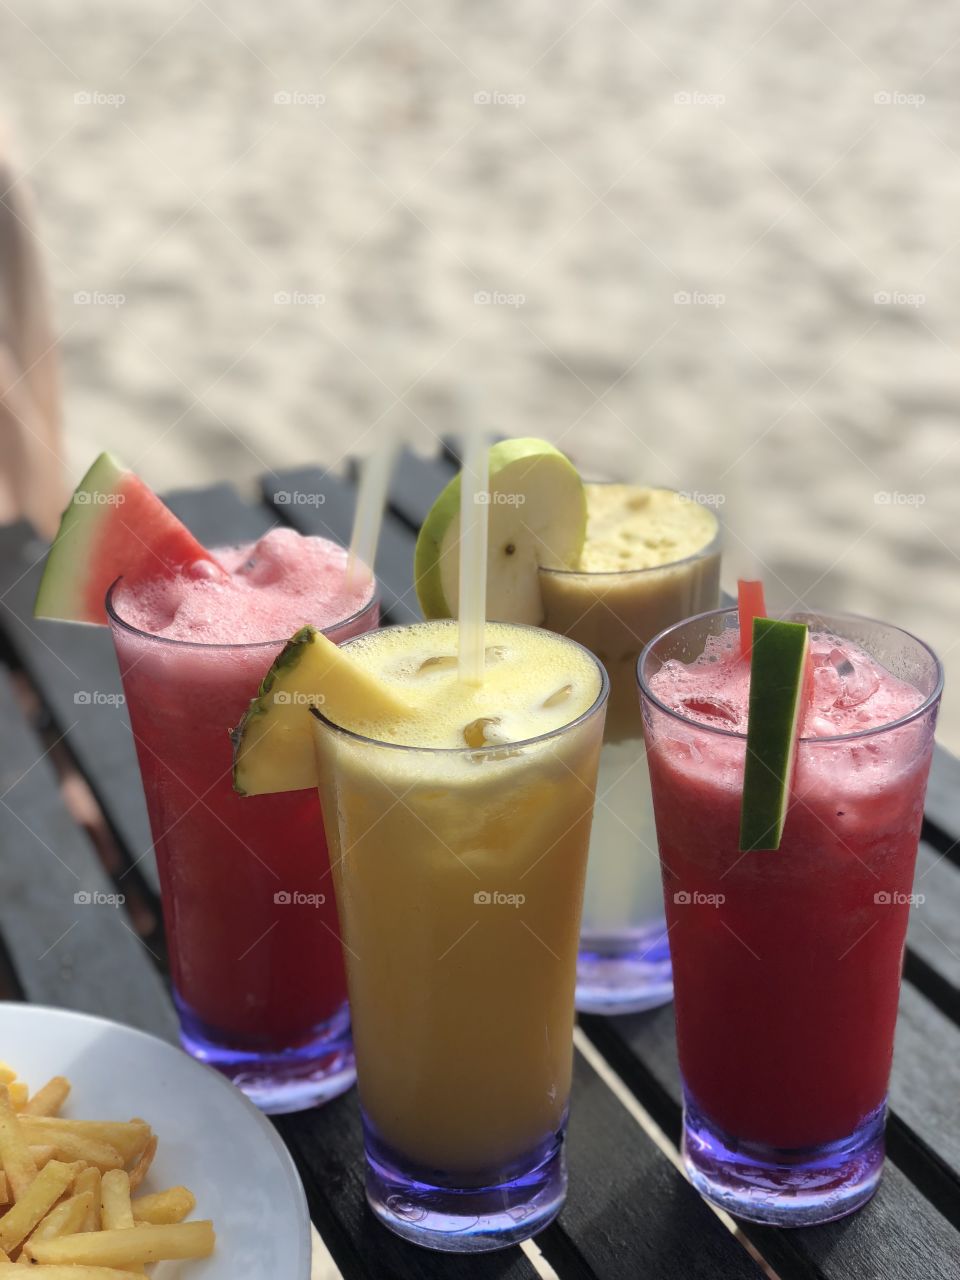 Fruit drinks at the beach